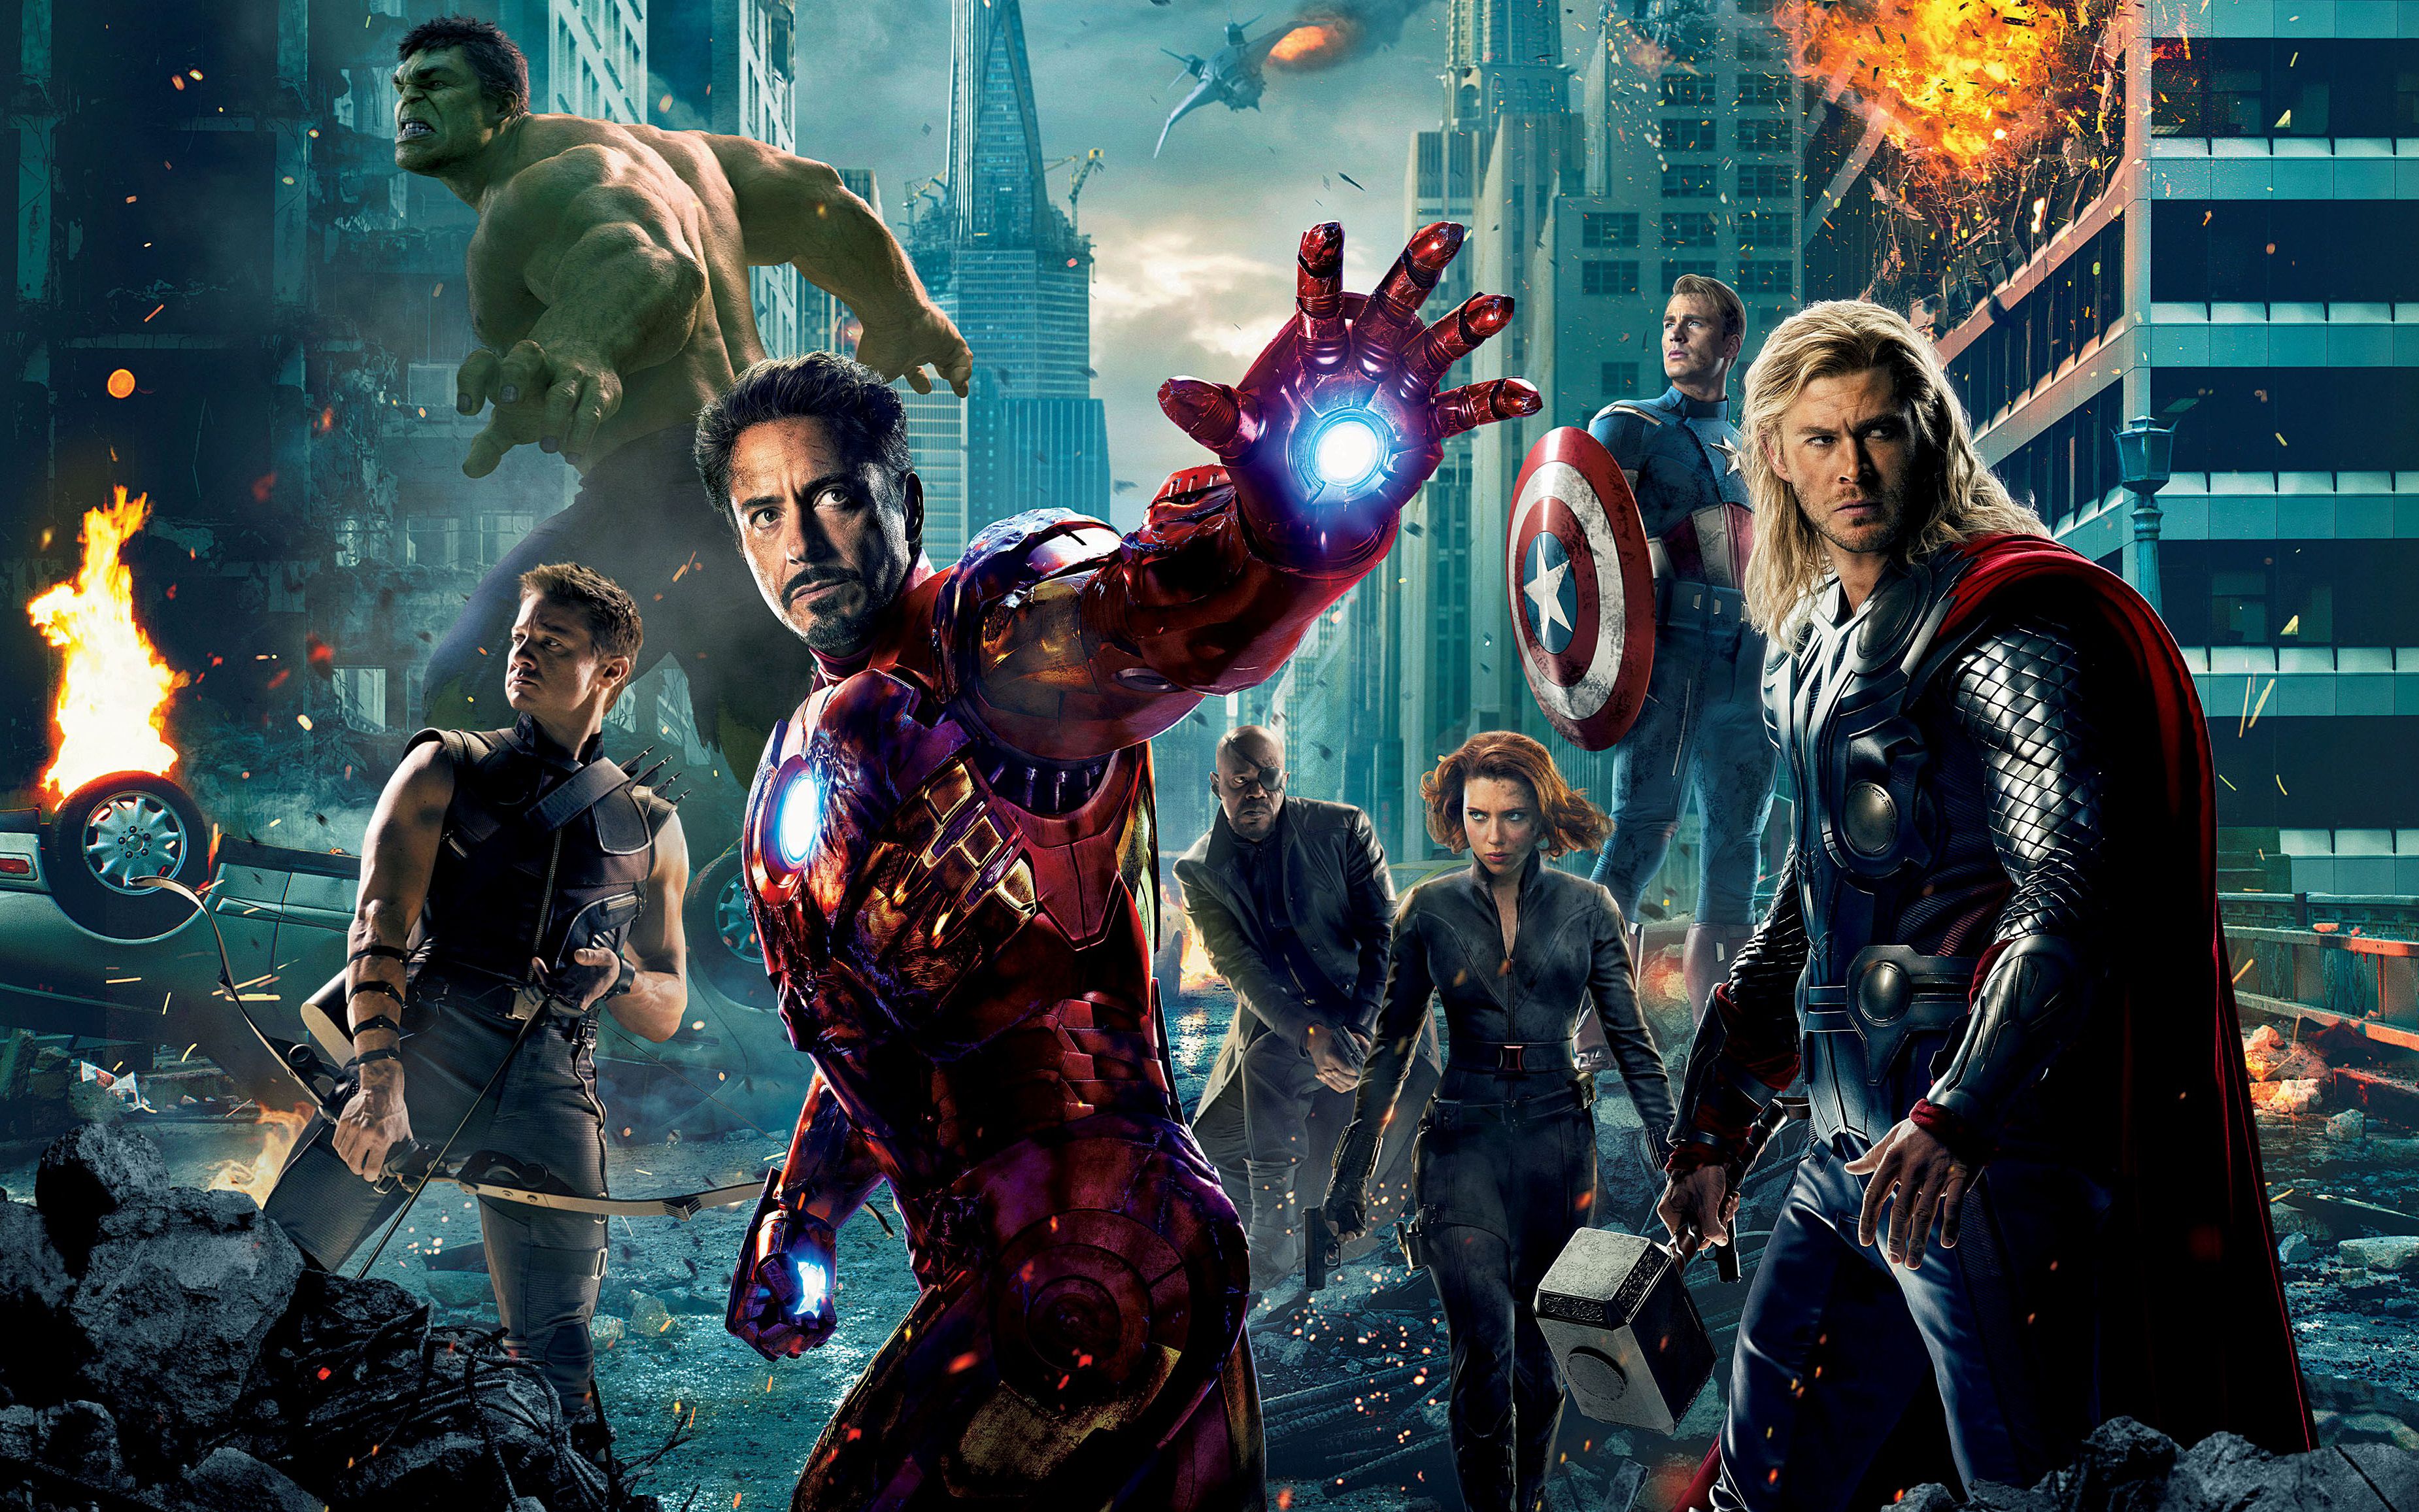 Cool Avengers Picture.jpg